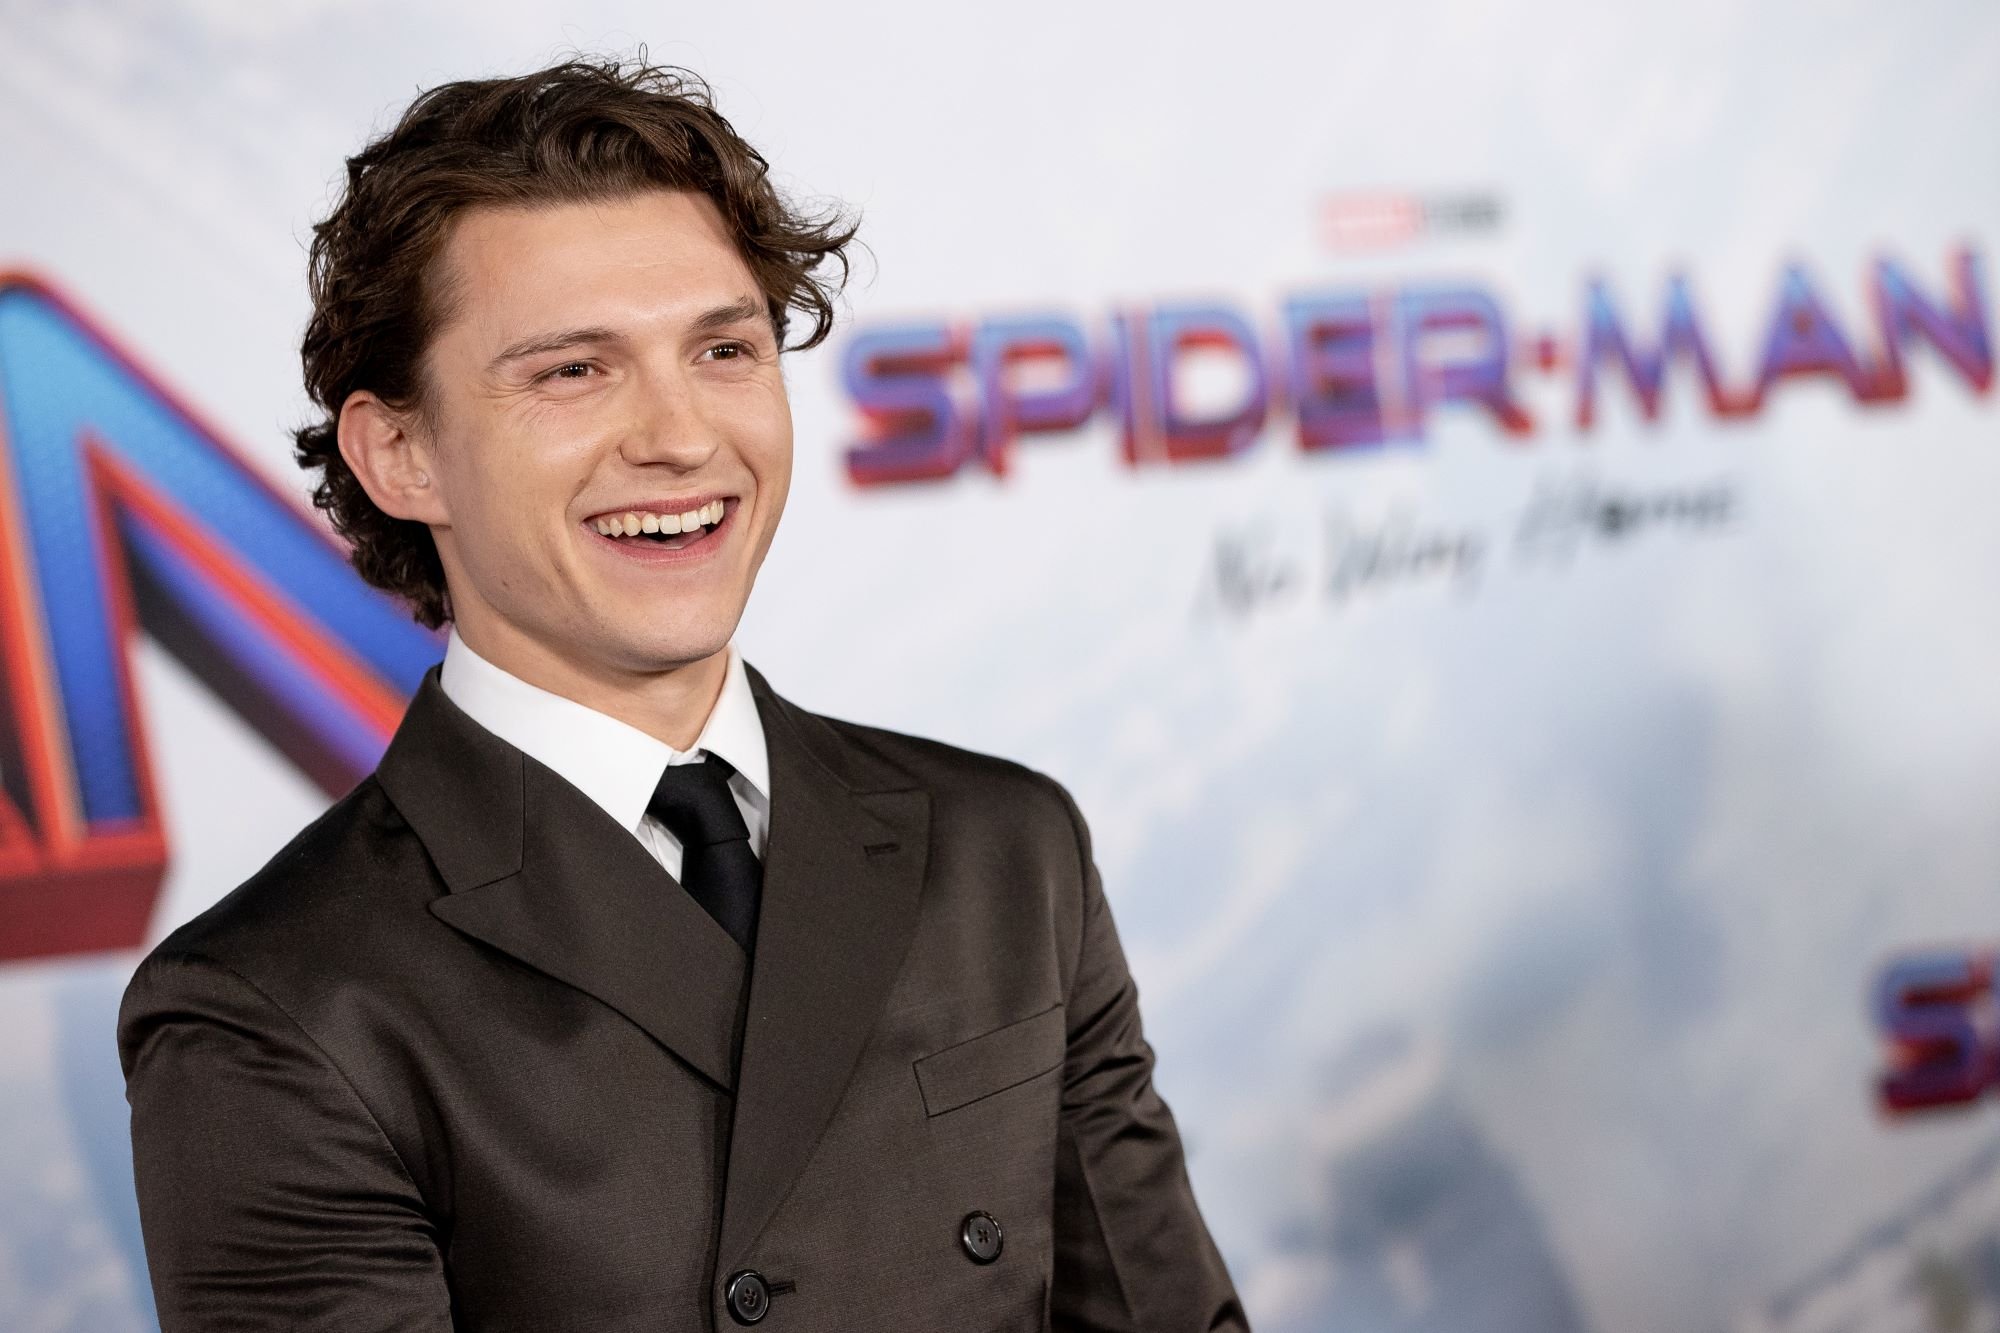 'Spider-Man: No Way Home' star Tom Holland, who wants to work with Florence Pugh in the MCU, wears a black suit jacket over a white button-up shirt and black tie.